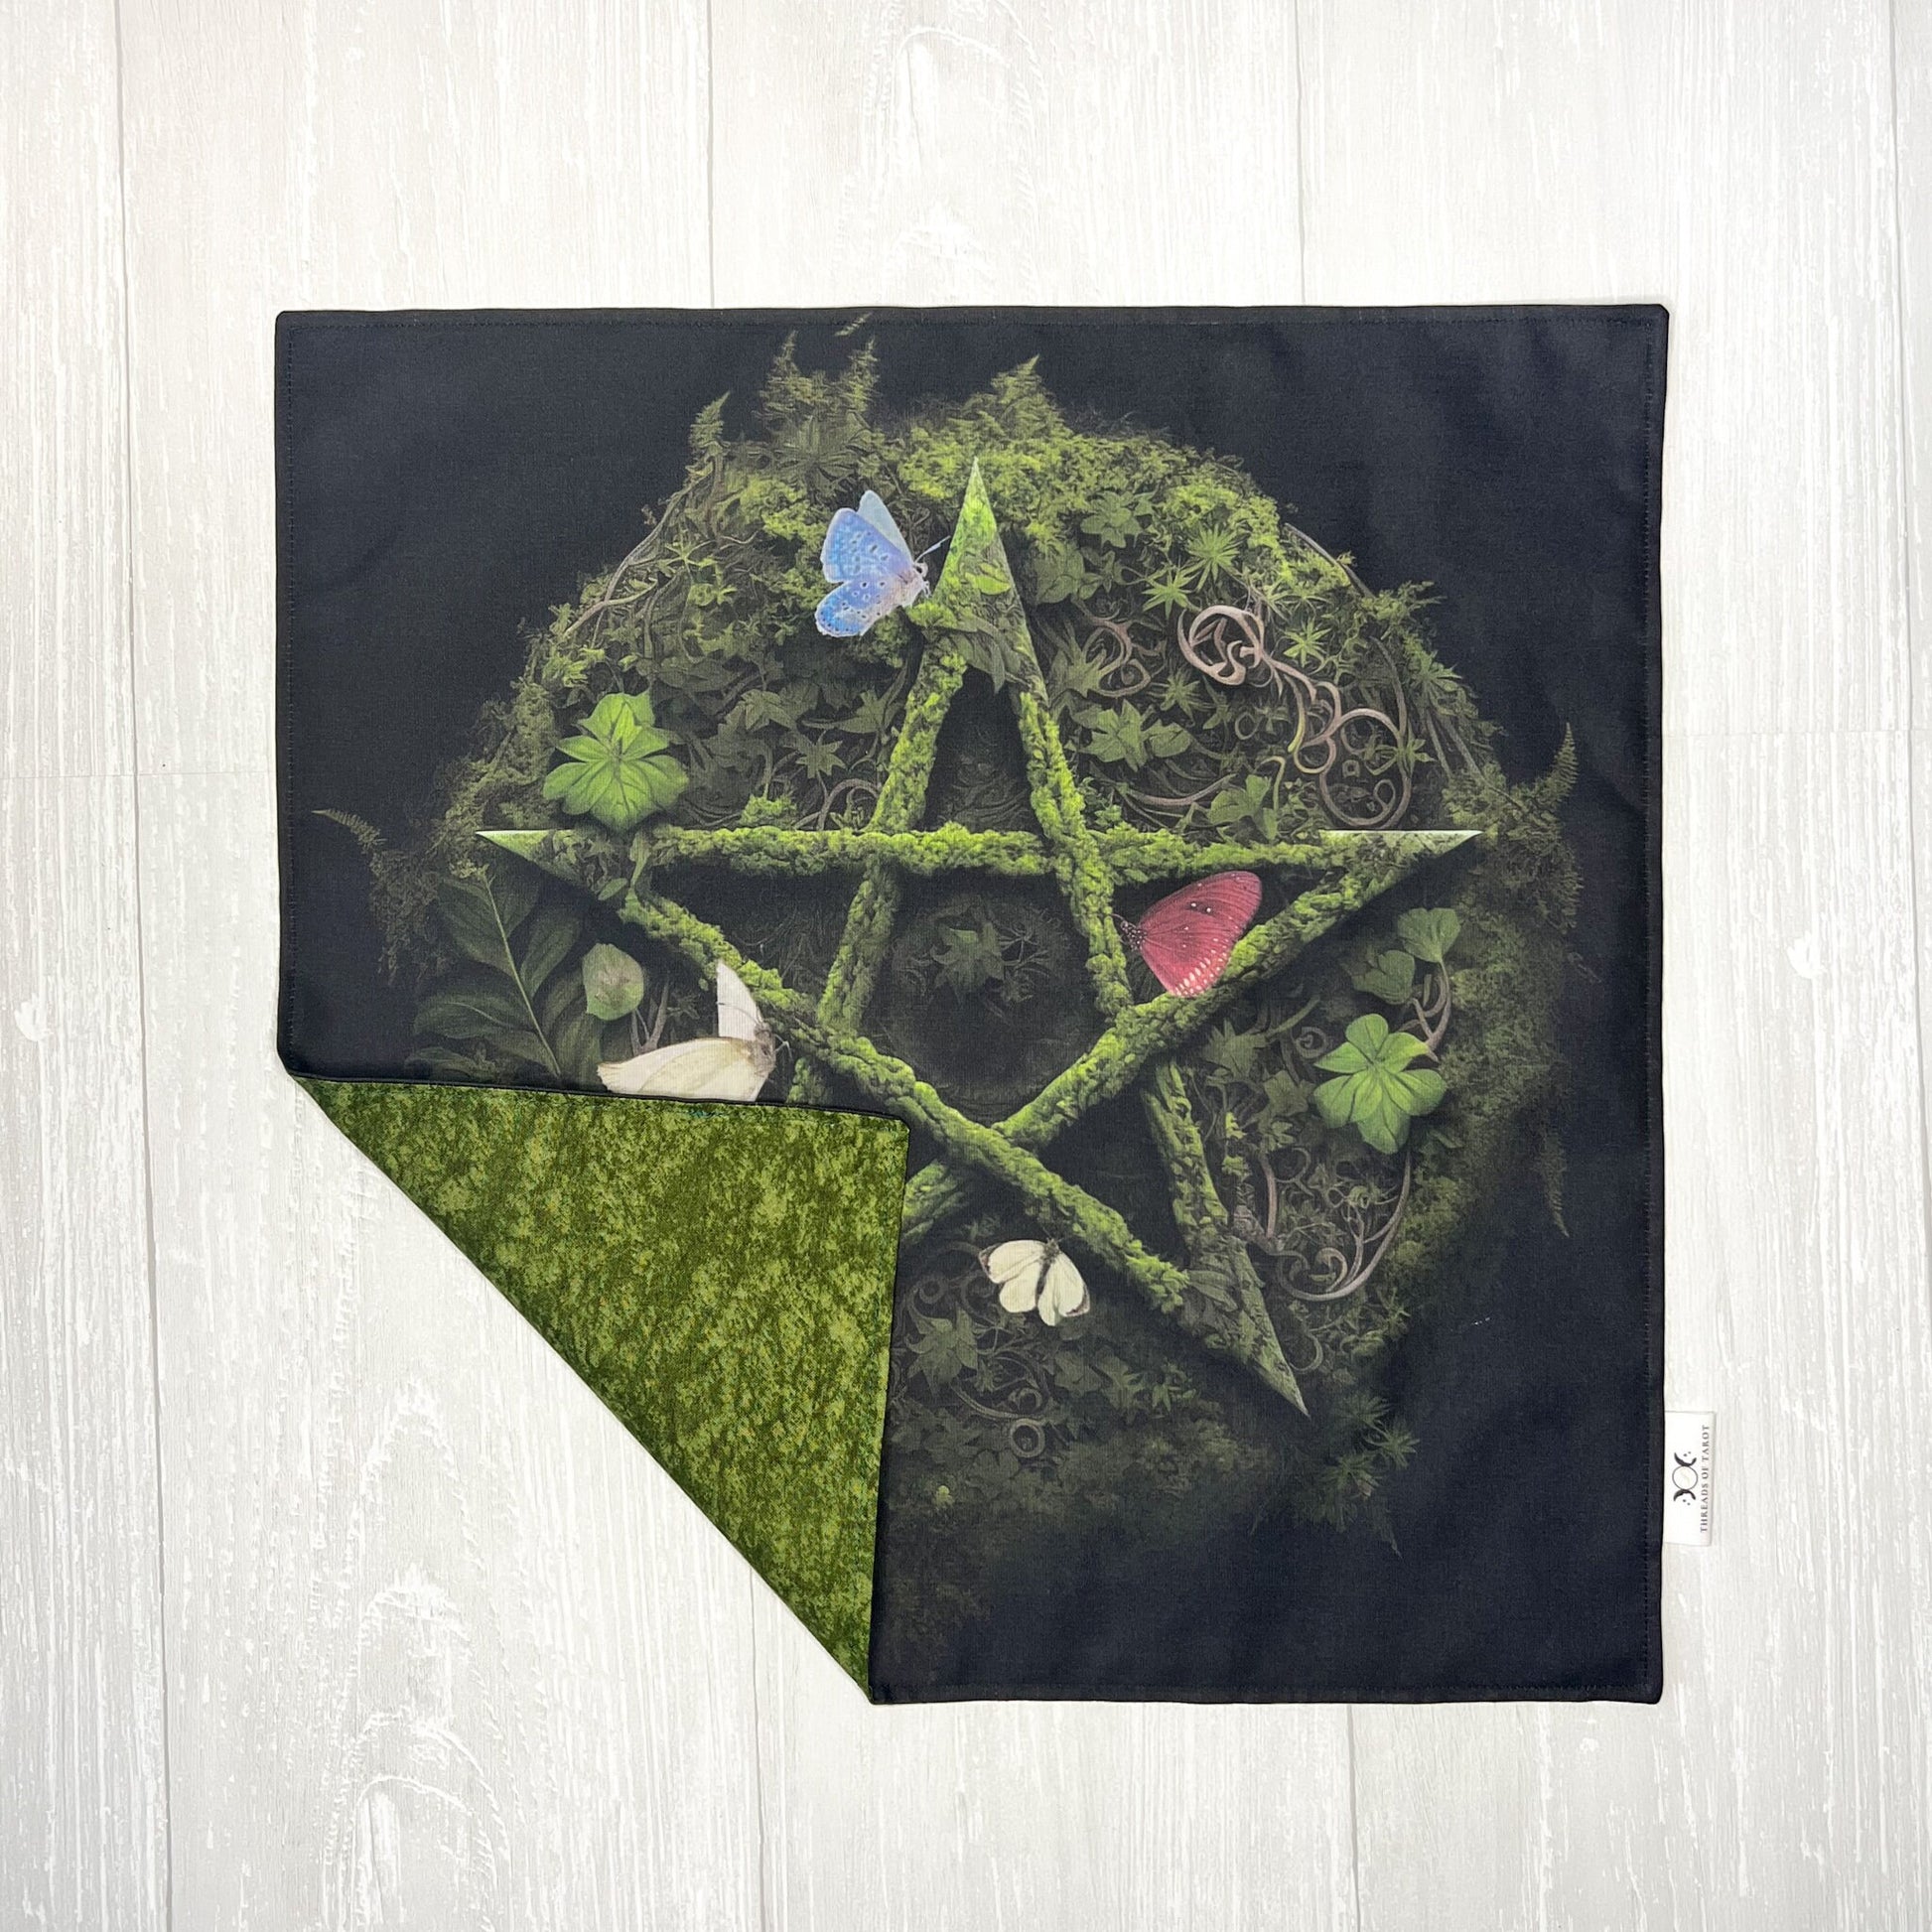 Earthy Pentacle Altar Cloth, Tarot Reading Cloth, Earthy Tarot Reading Supplies and Accessories, Rune Casting Cloth, Witch Tarot Reader Gift